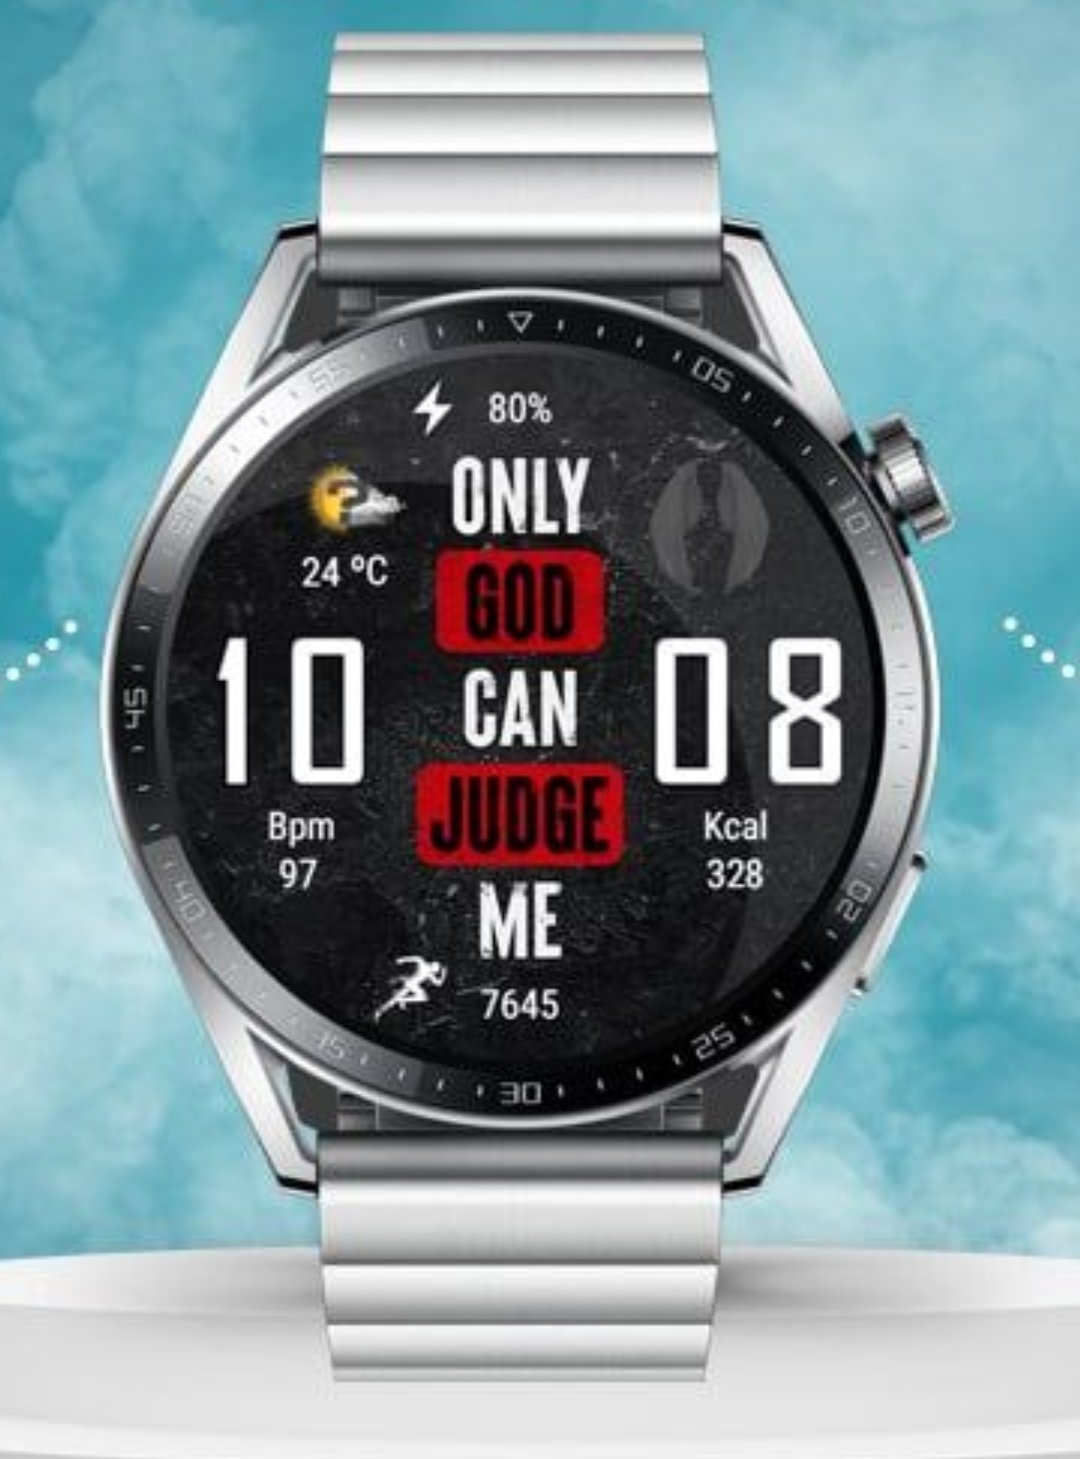 Only God Can judge me digital watch face theme